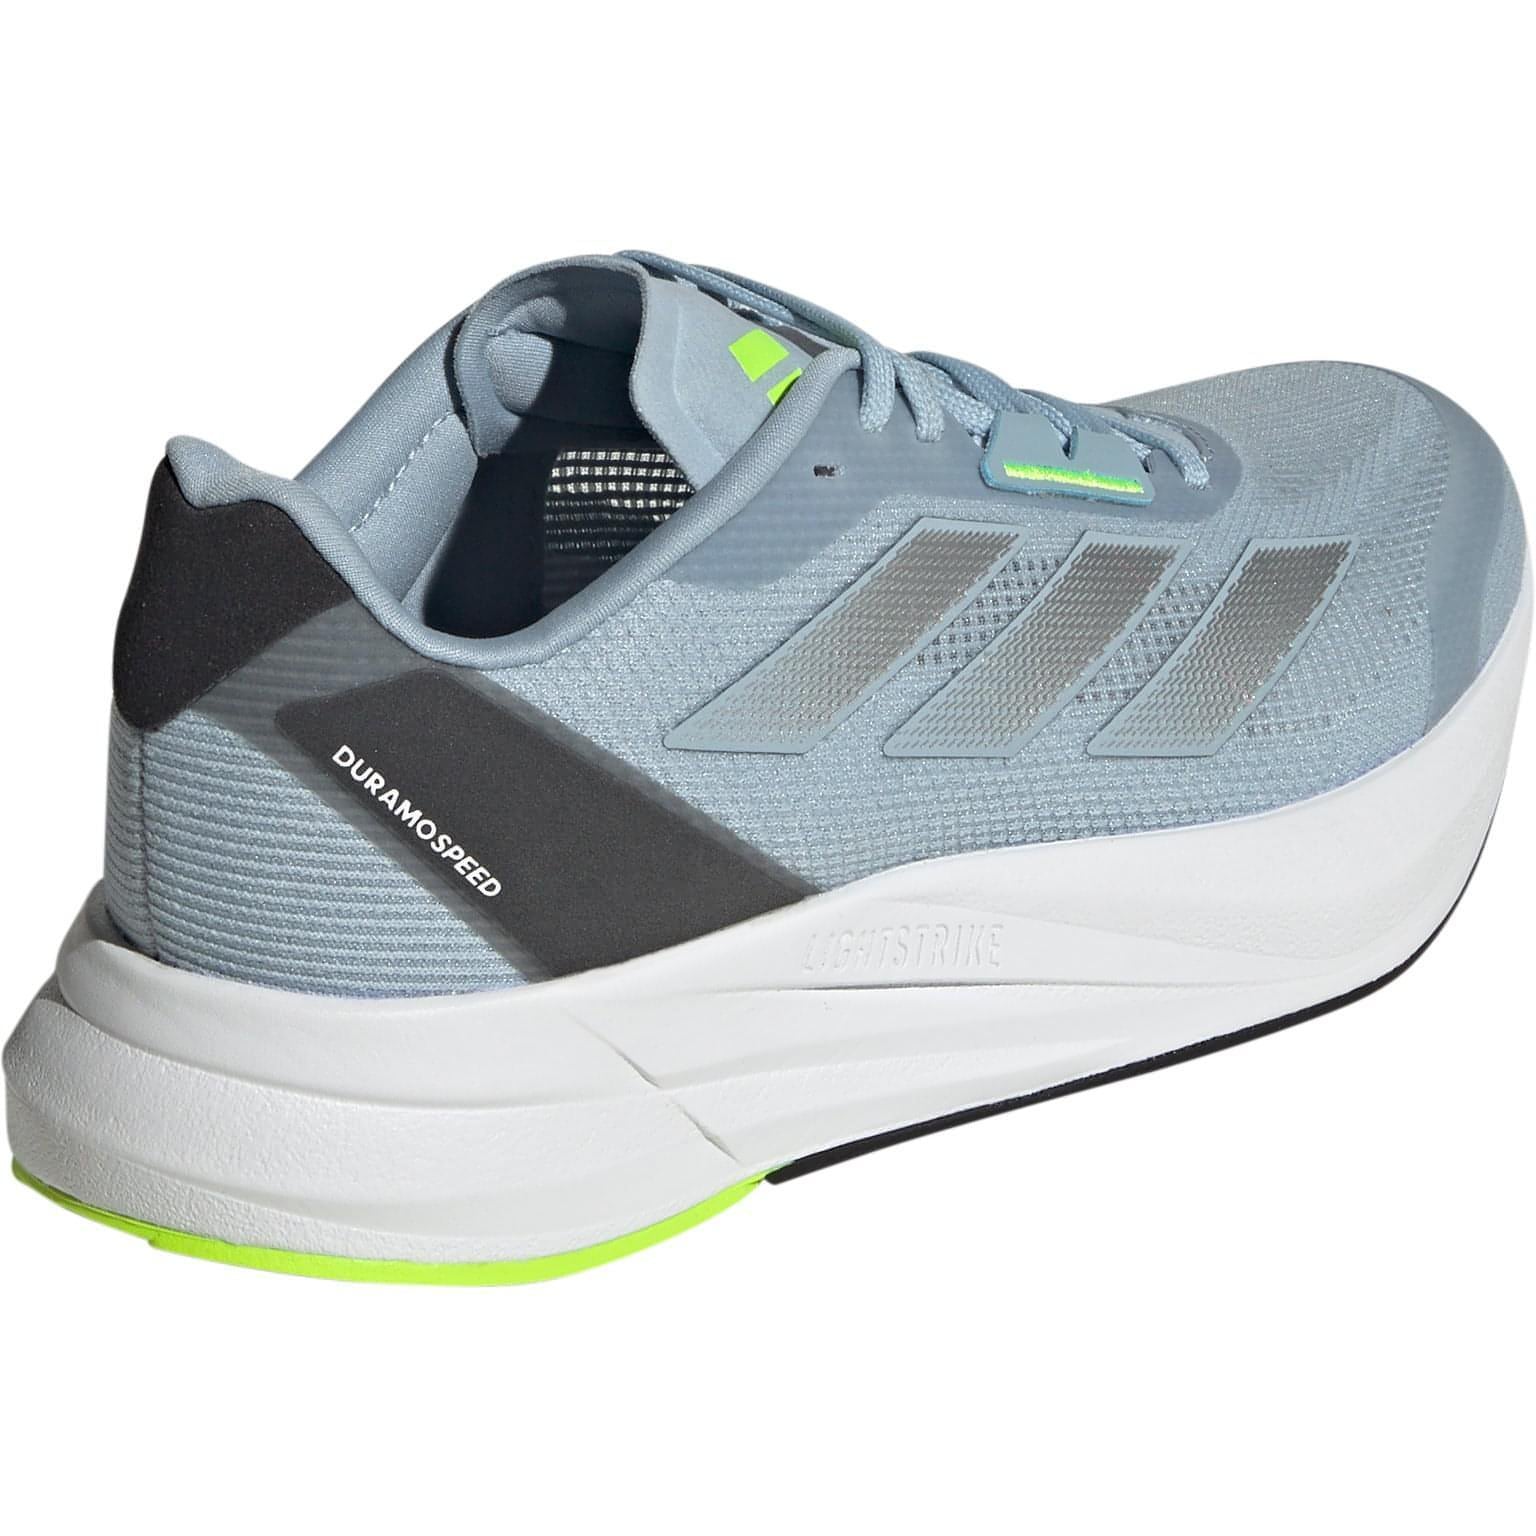 Adidas Duramo Speed Shoes Ie9686 Back View